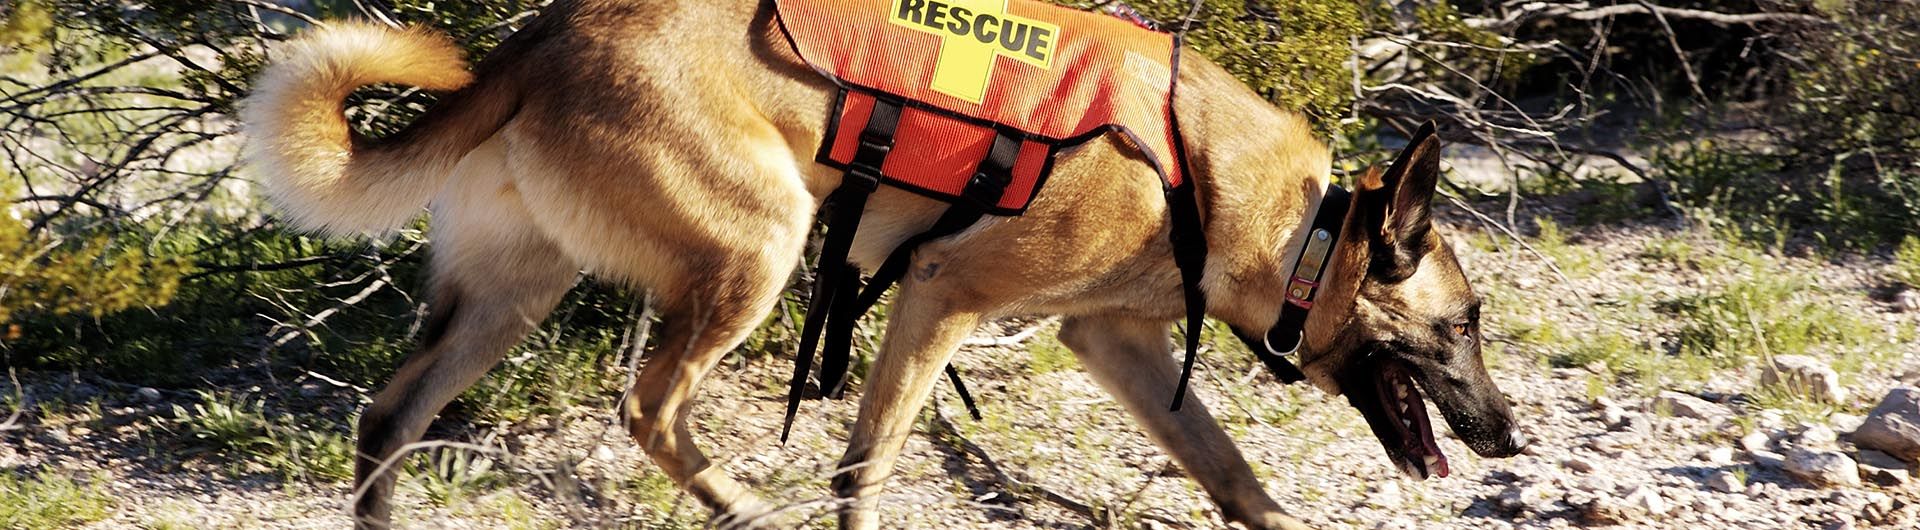 K9 Dogs - Tracking Dogs